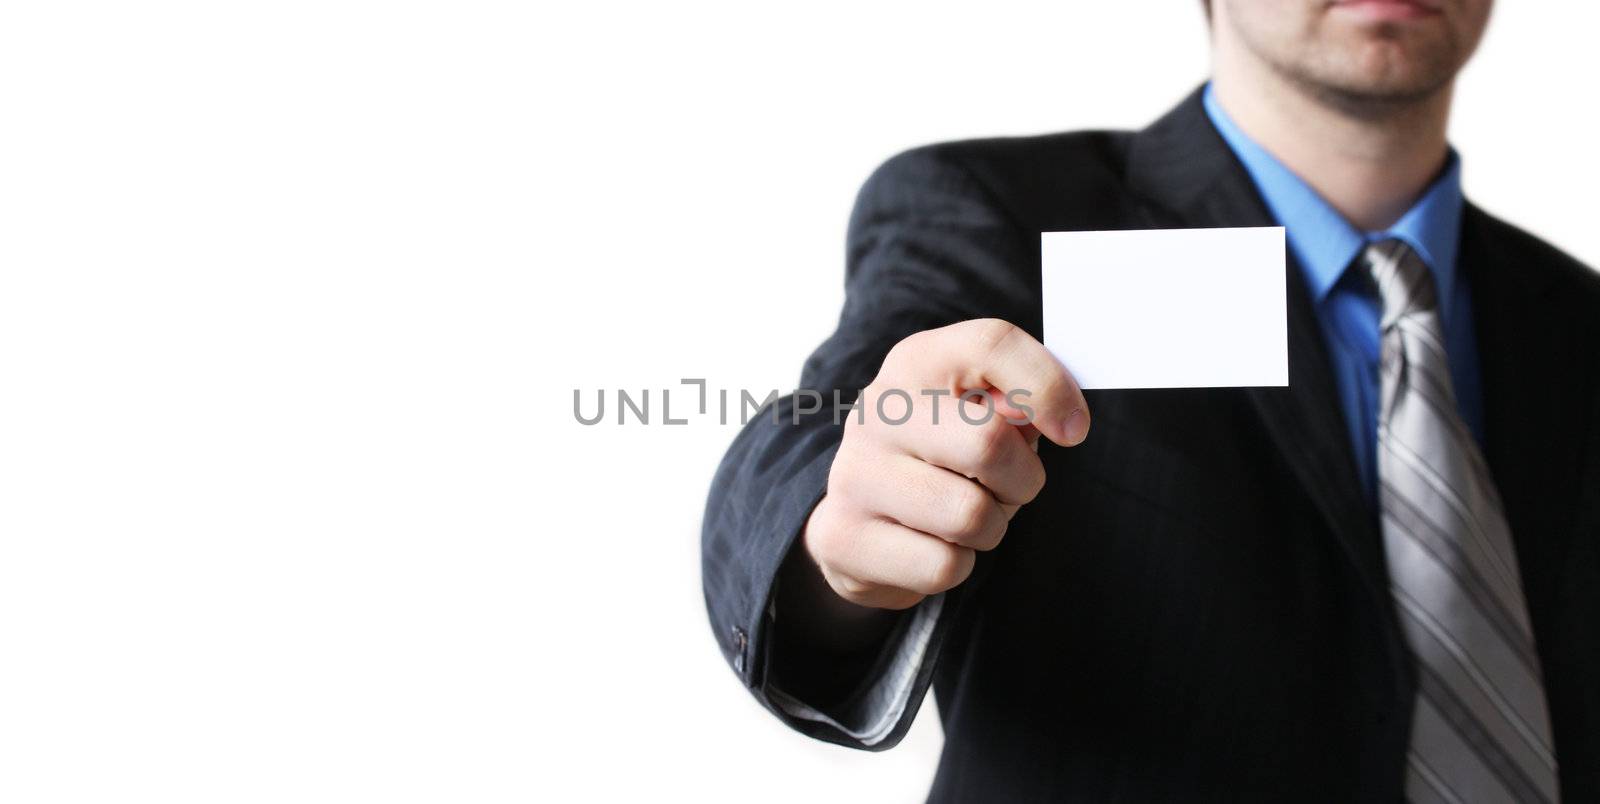 man holding business card in hand by photochecker